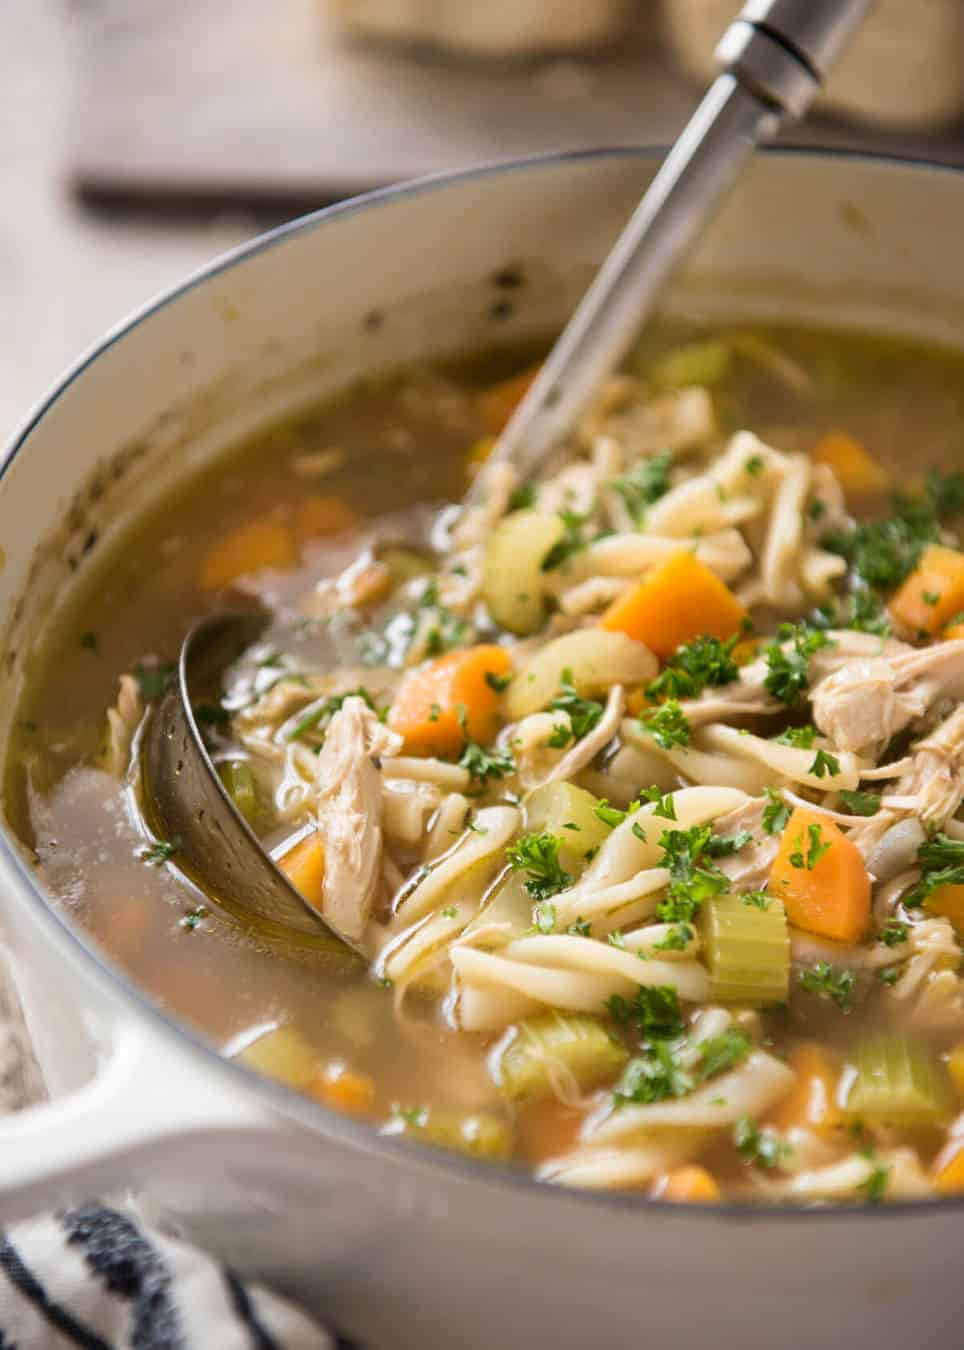 How To Make Chicken Soup
 how to make chicken noodle soup with whole chicken